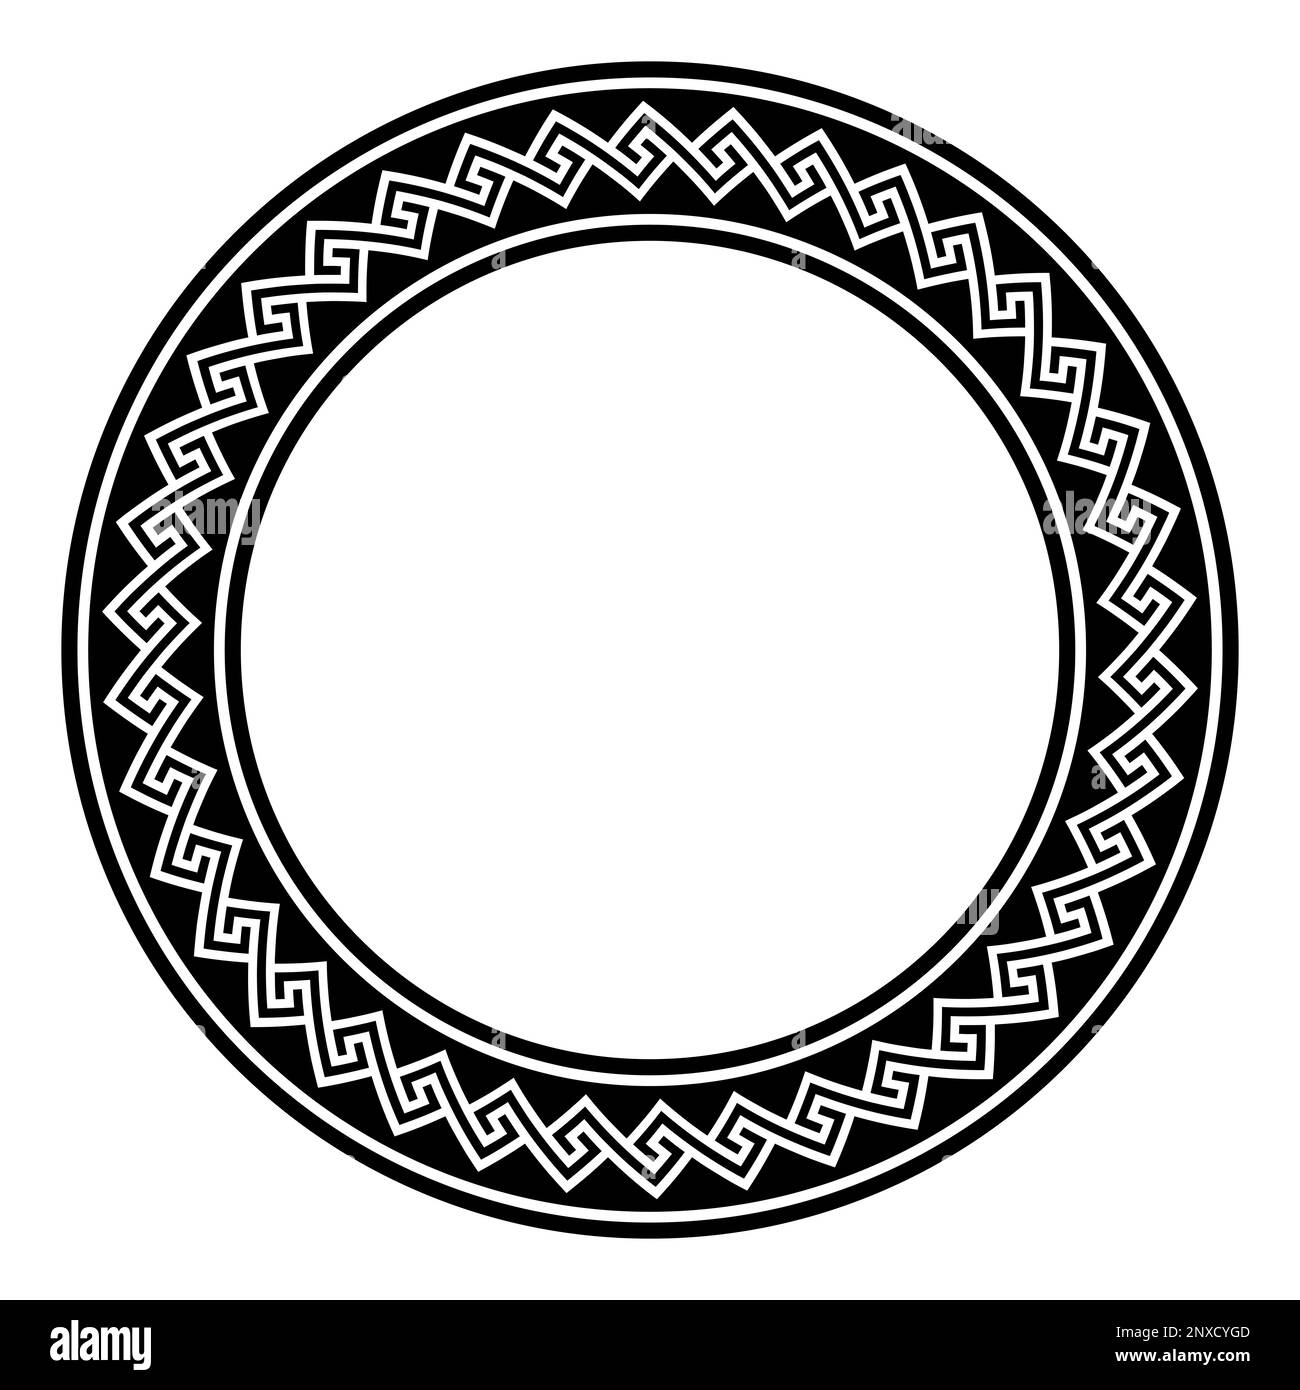 Hopi meander pattern, circle frame. Decorative border created by a seamless and disconnected meander pattern. Stock Photo